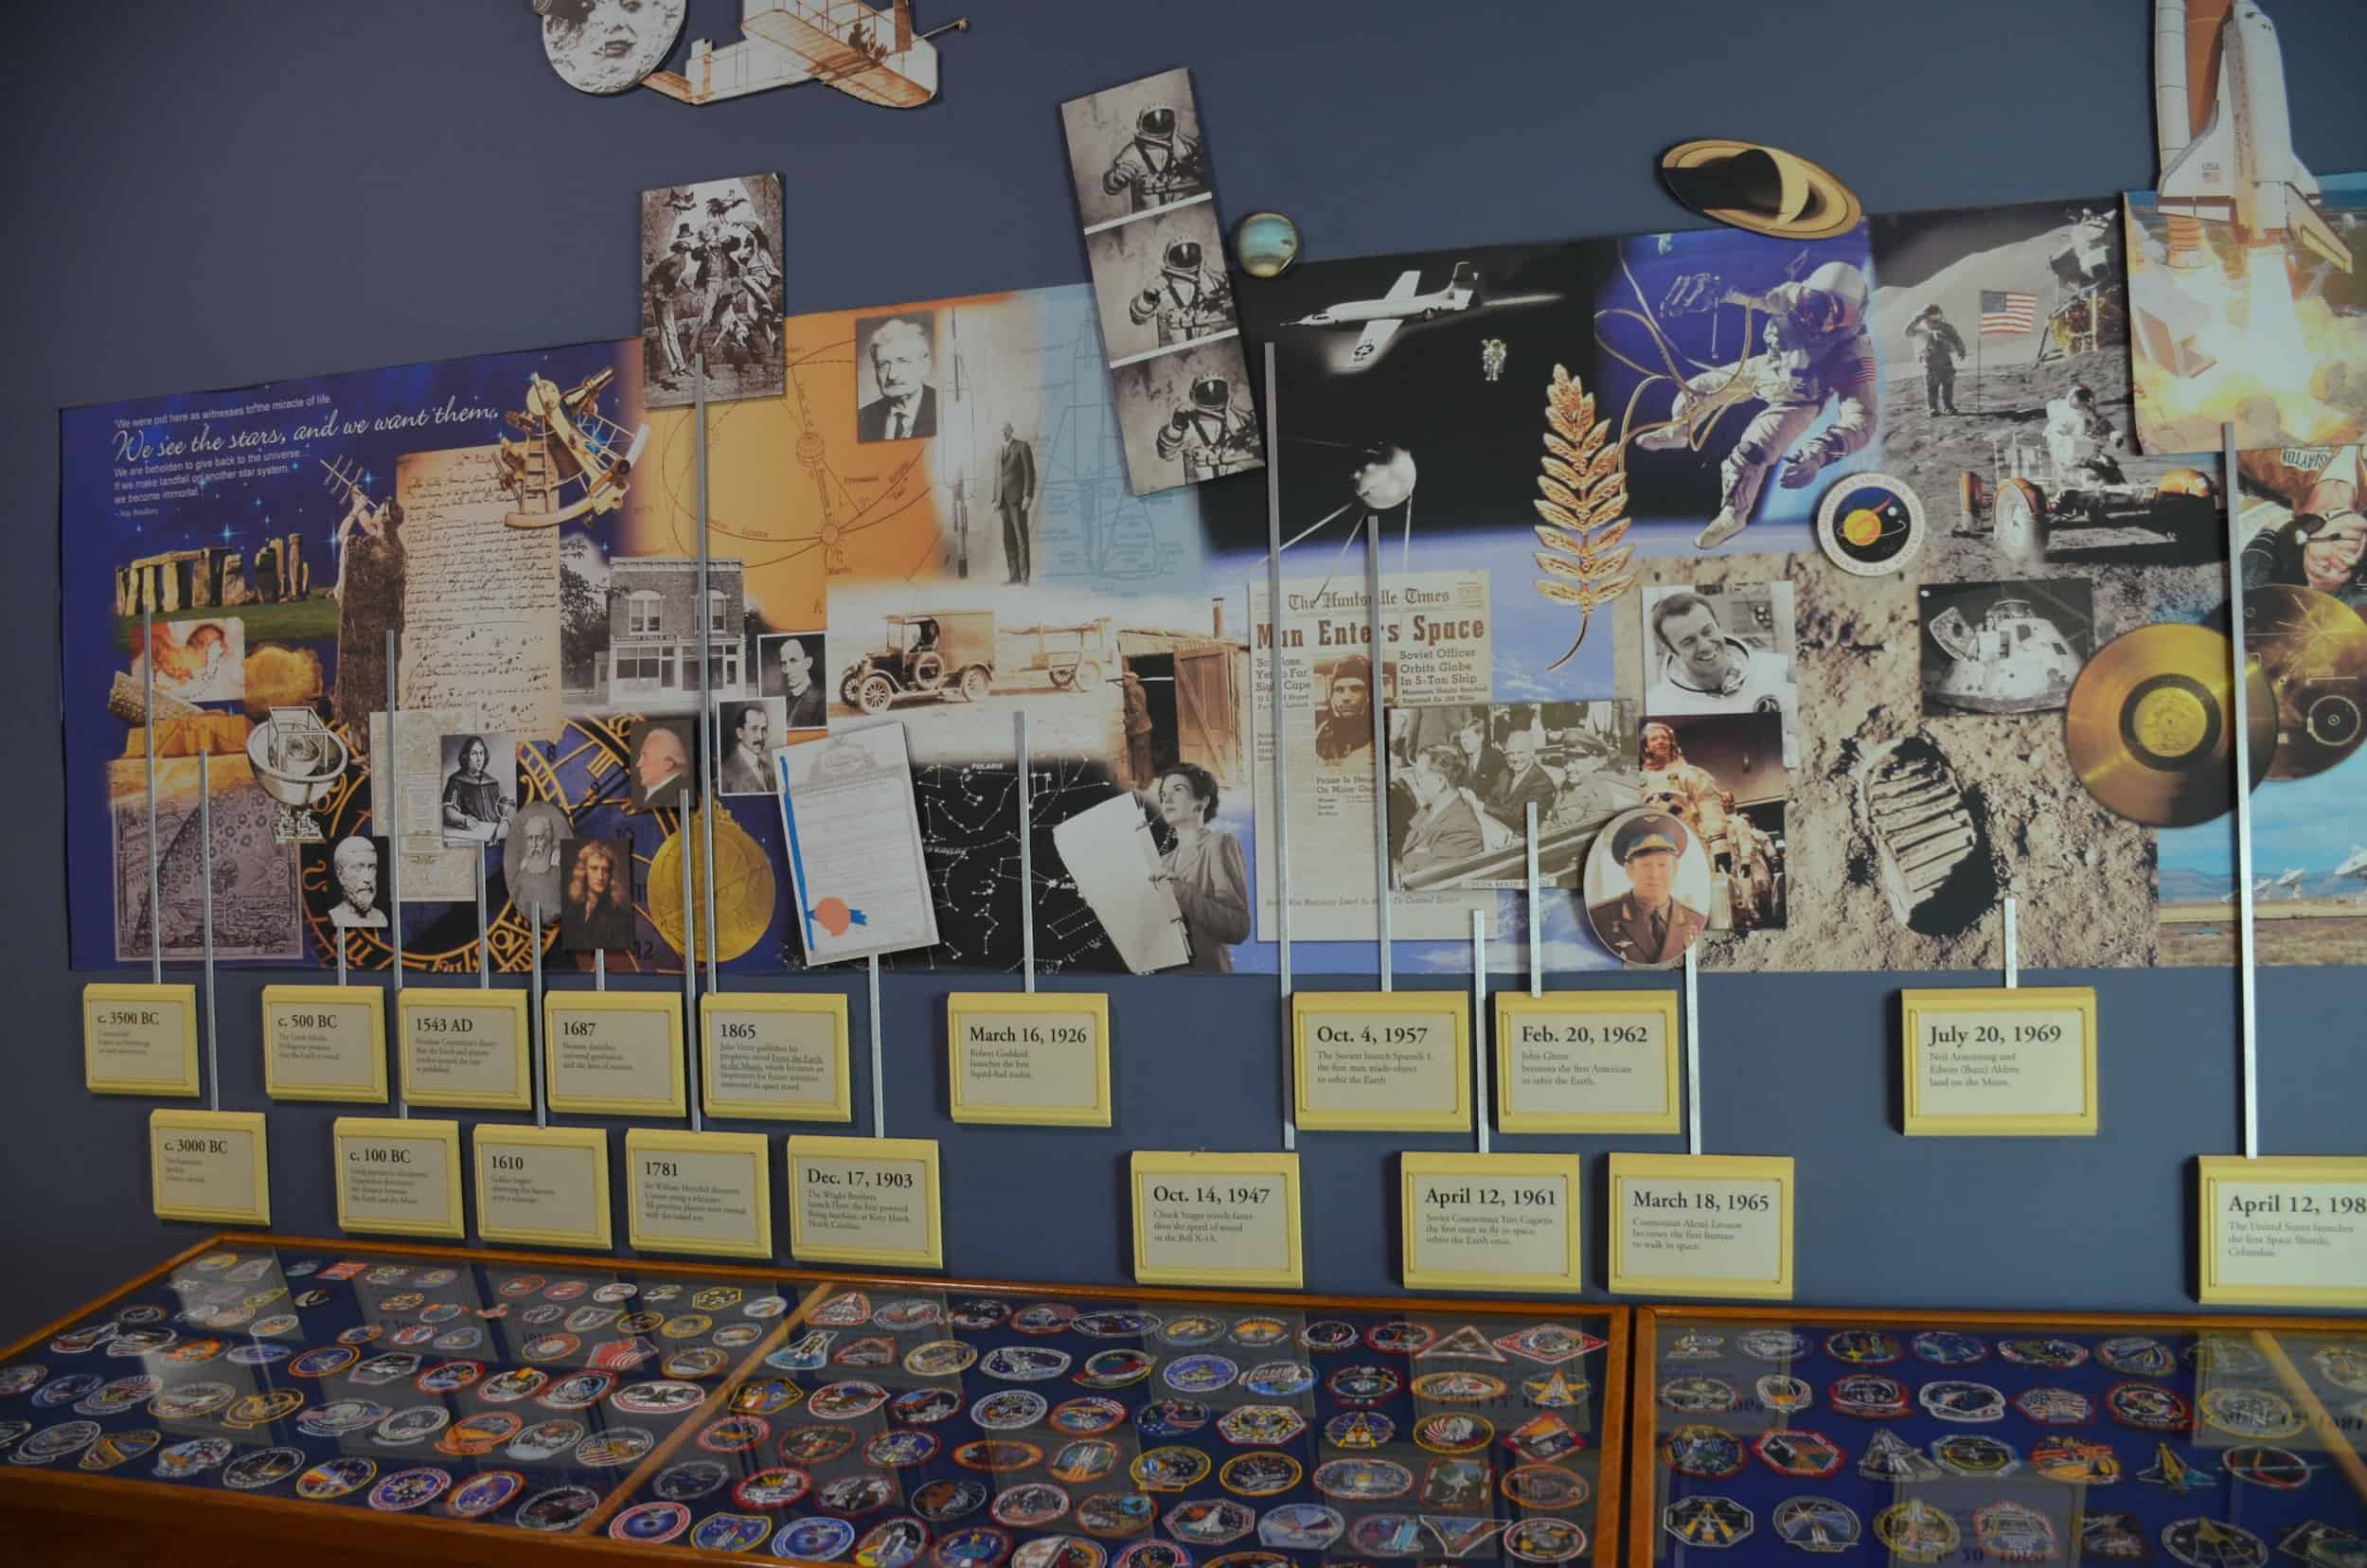 Space exploration timeline at the New Mexico Museum of Space History in Alamogordo, New Mexico